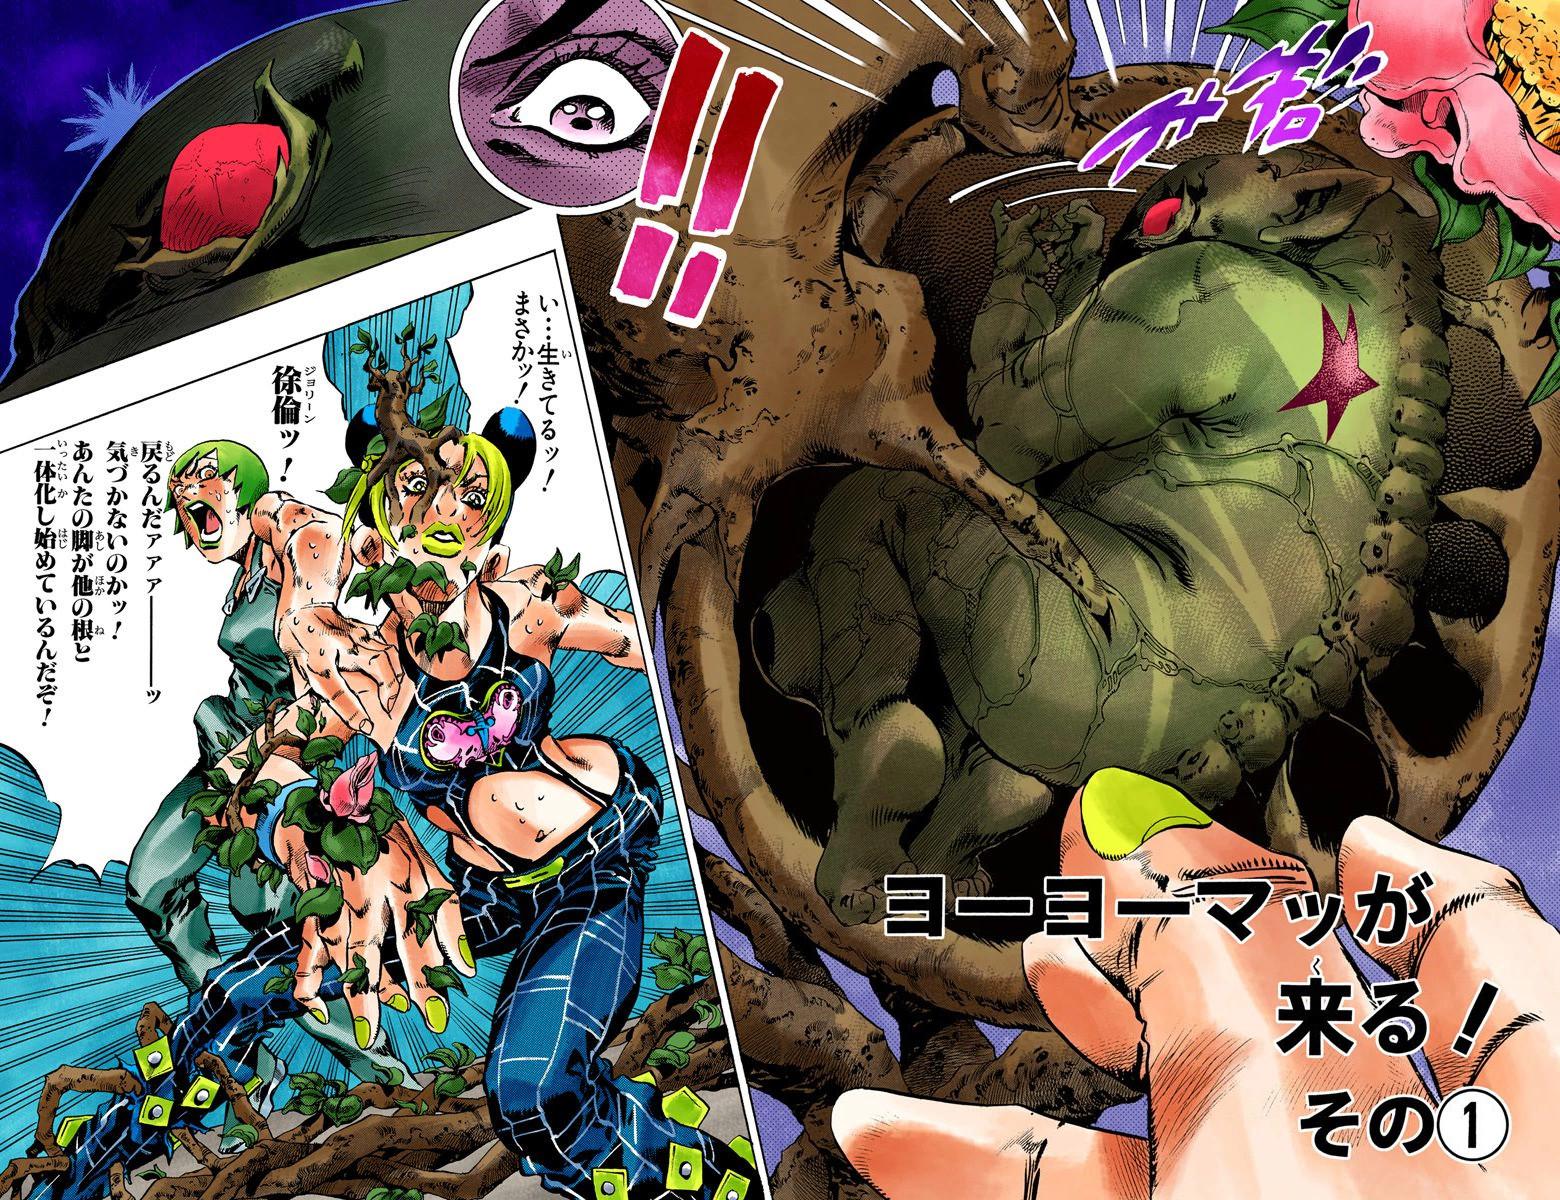 JoJo System on Remnant Chapter 6 - Chapter 6: Look at the Bottom for Title